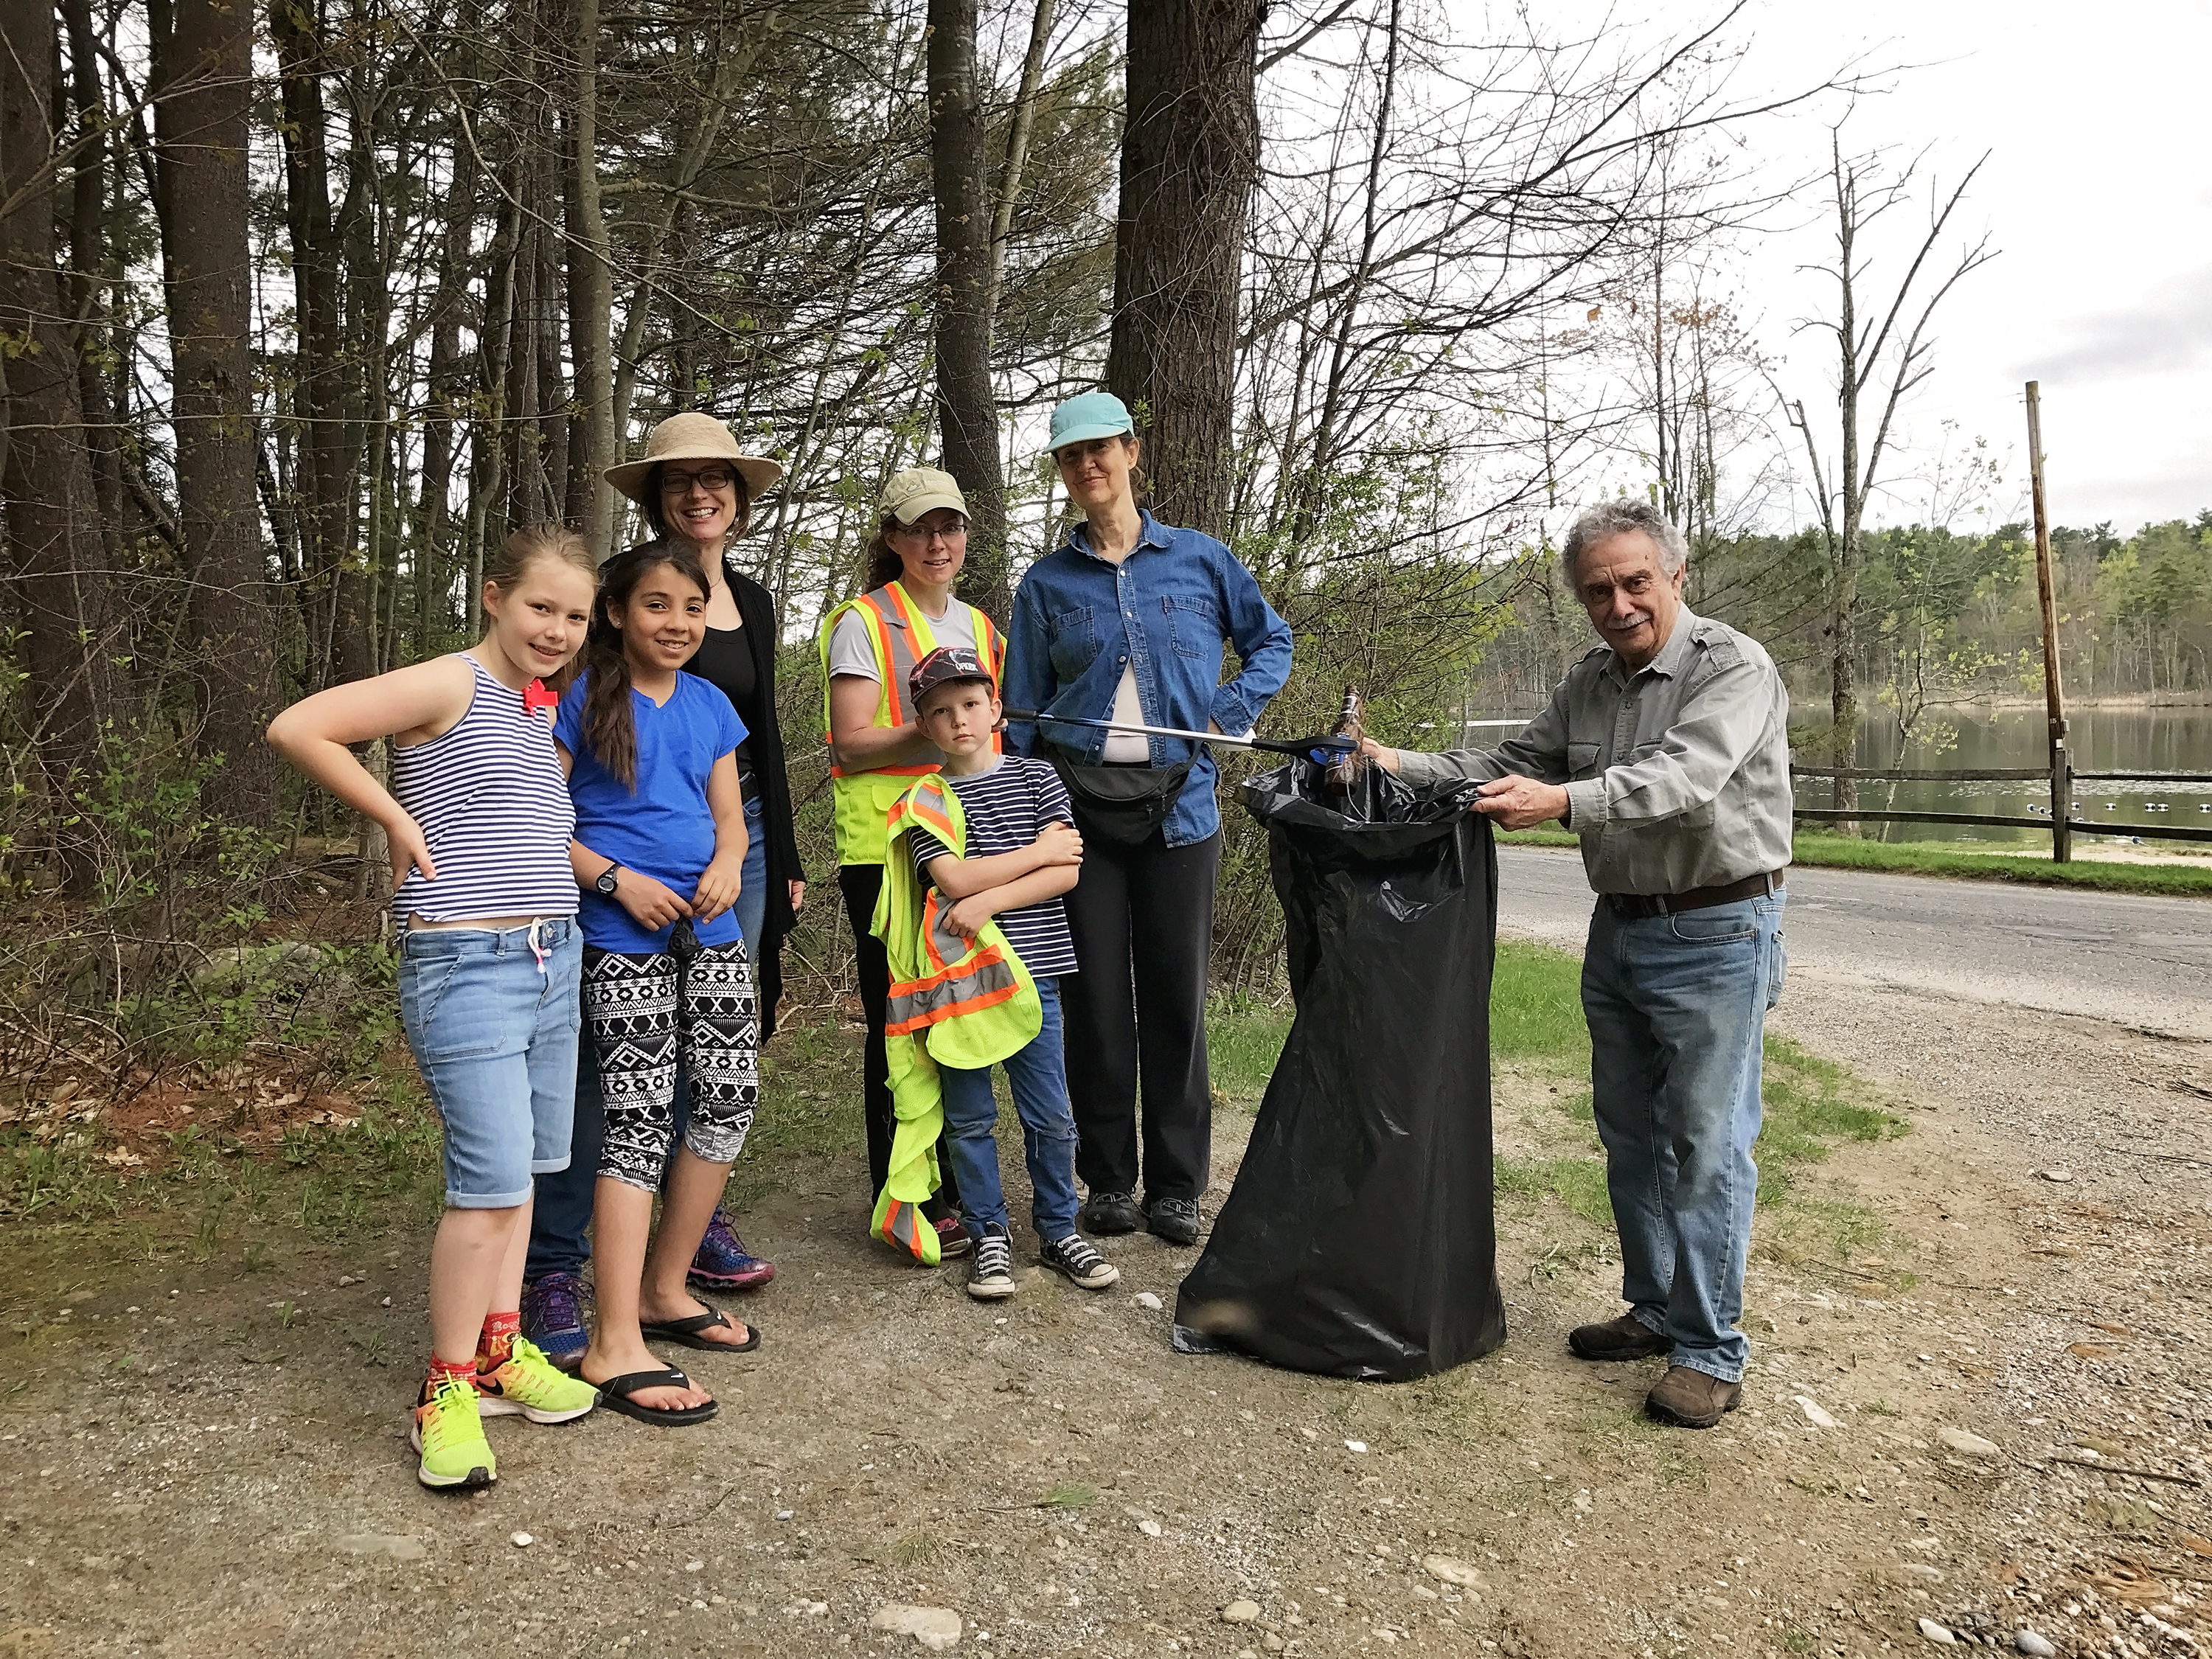 Come volunteer at Lake Mansfield in Great Barrington Sunday May 5th, 2019 